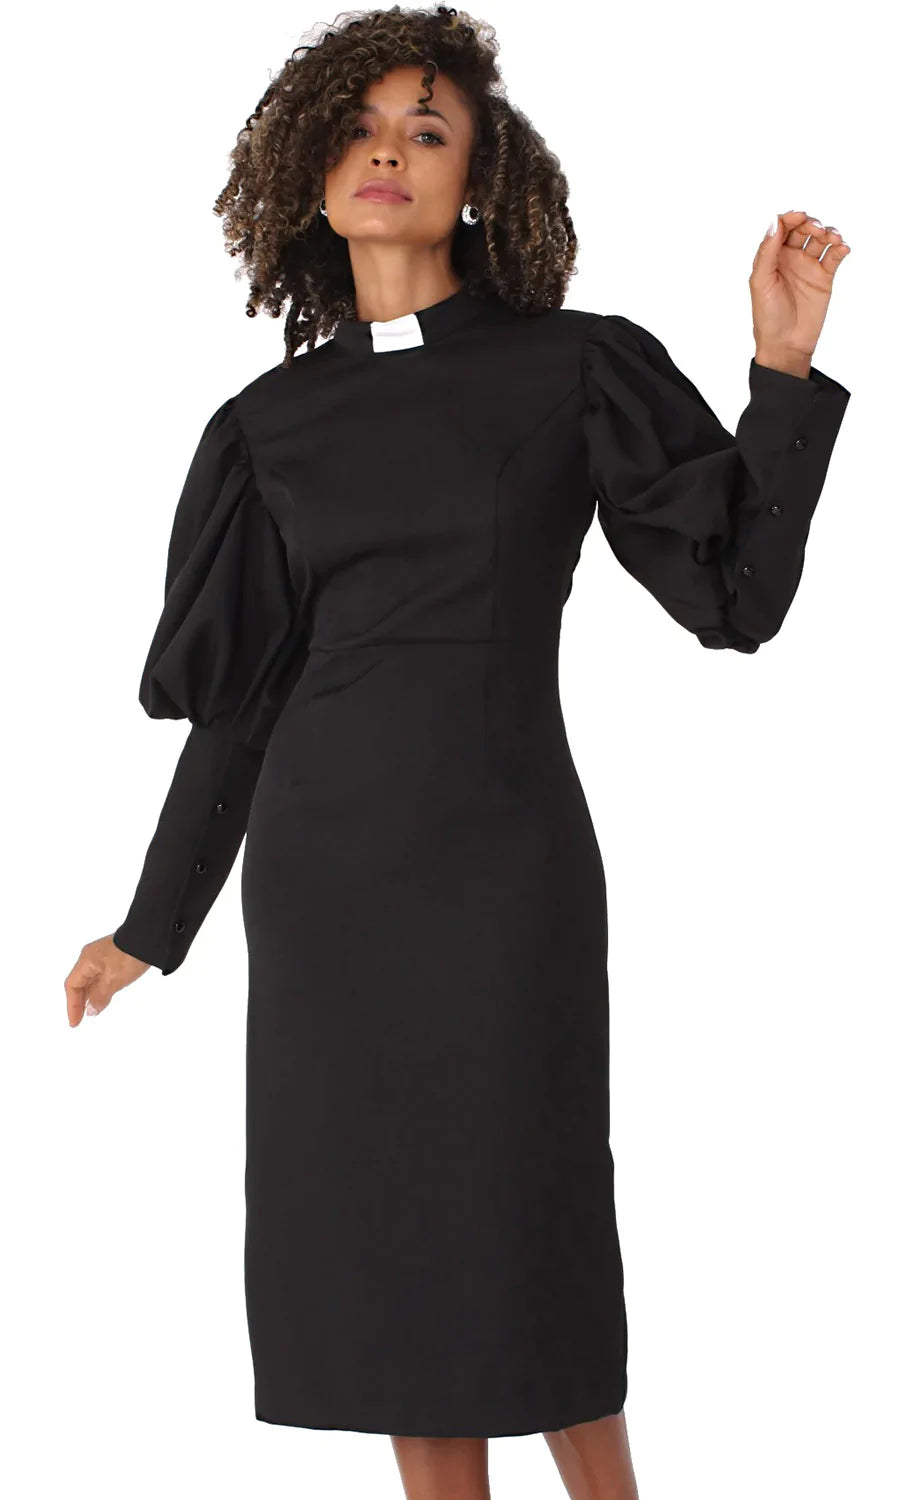 Tally Taylor Usher Dress 4813-Black - Church Suits For Less